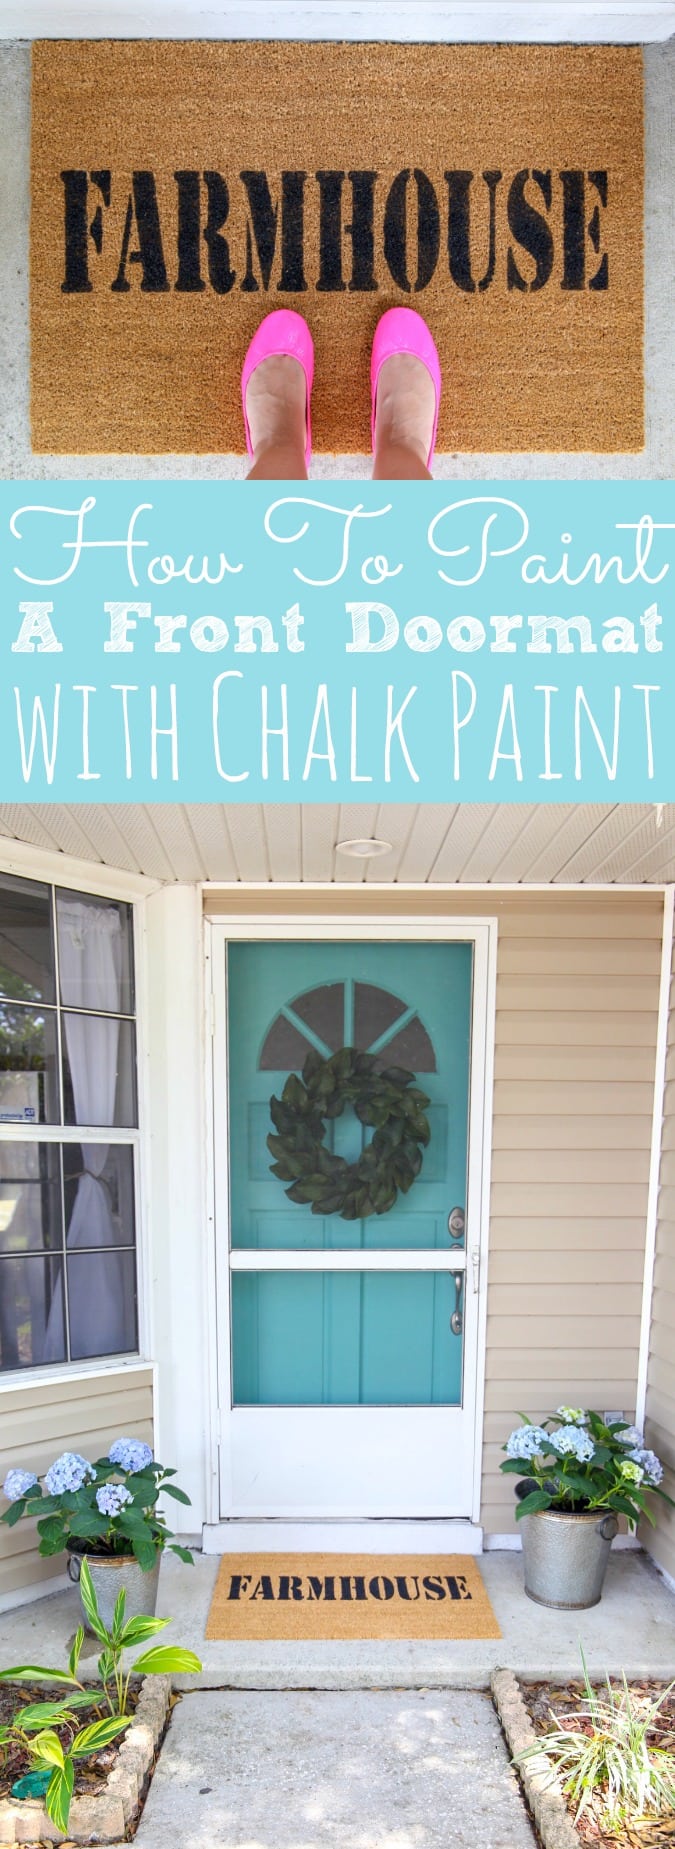 How To Paint A Custom Doormat Tutorial With Chalk Paint + Giveaway - simplytodaylife.com